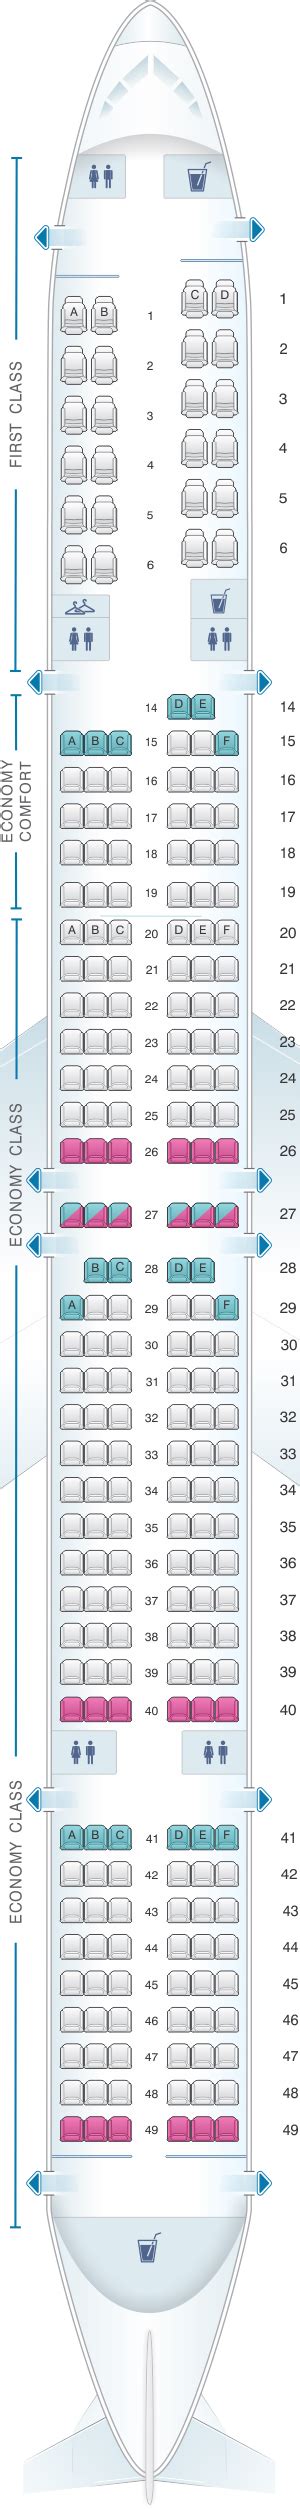 Delta 753 Seating Chart Seat Map Boeing 757 200 Delta Airlines Best